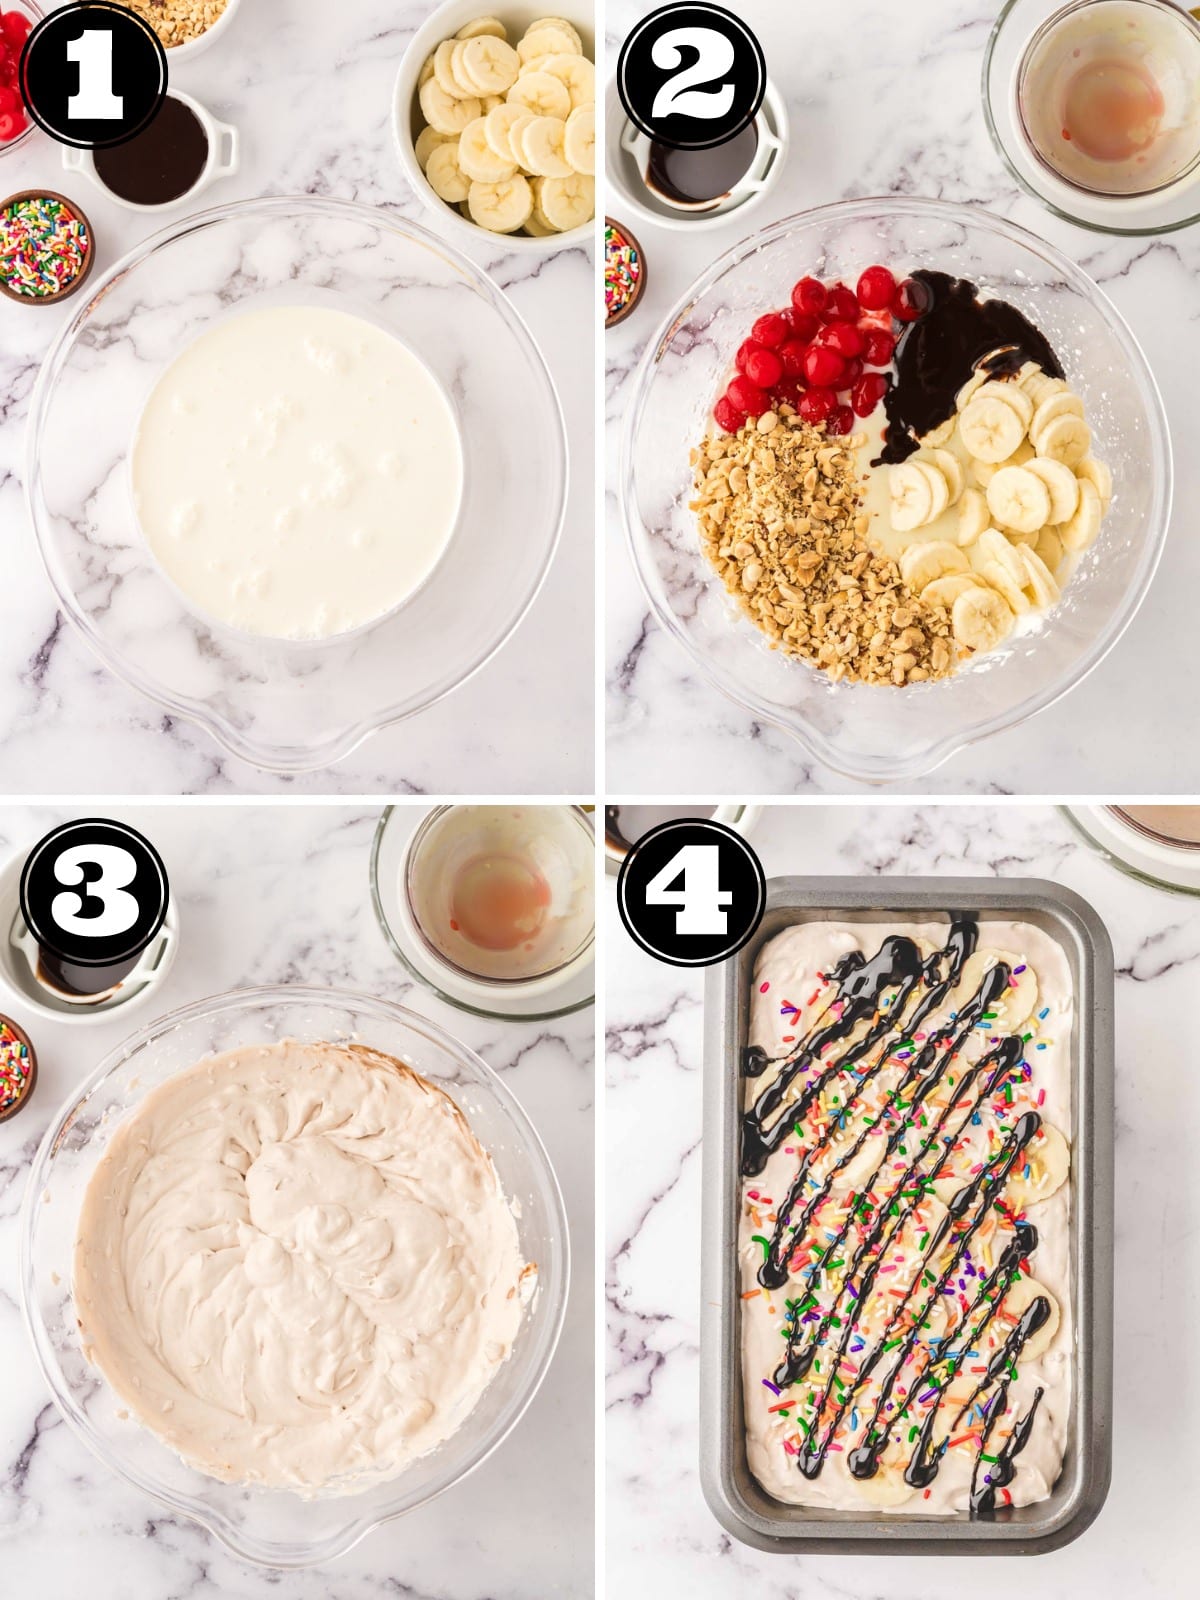 A collage image showing process steps to make no-churn banana split ice cream; a bowl of whipped heaven cream, adding ingredients and then folding into whipped cream, and finally placing in a loaf pan to freeze.